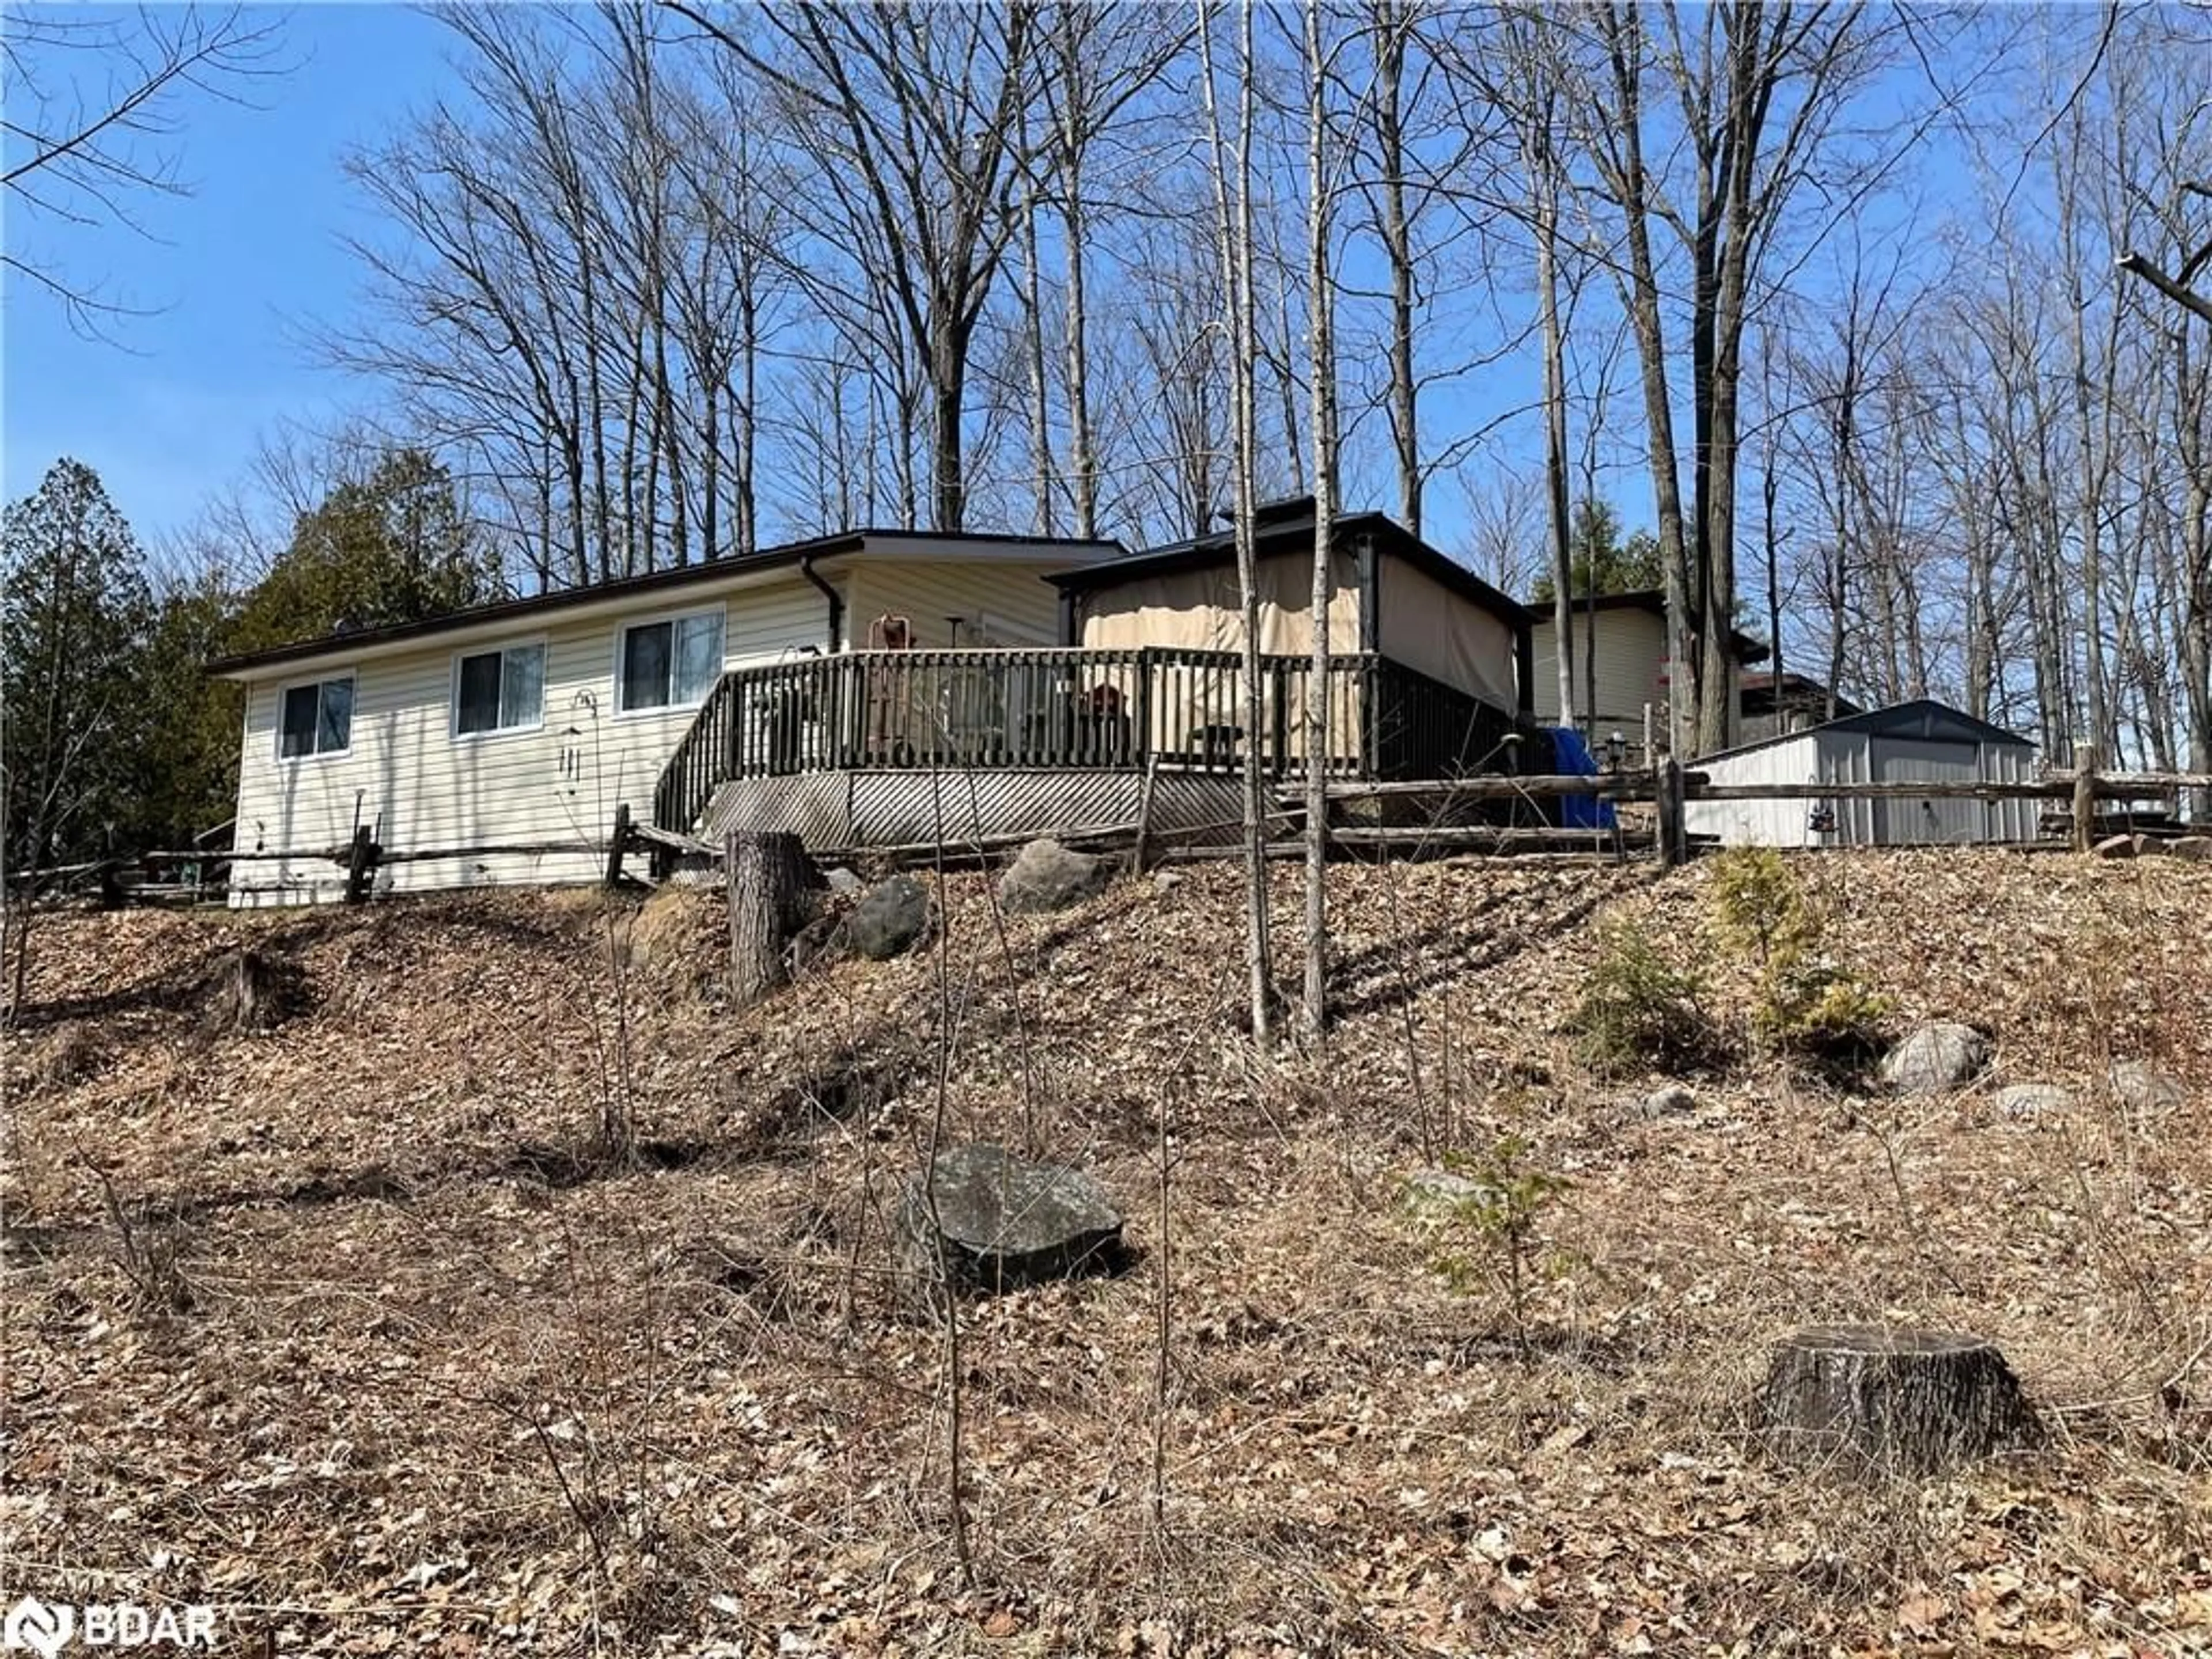 Frontside or backside of a home for 302 Quin-Mo-Lac Rd #133, Madoc Ontario K0K 2K0